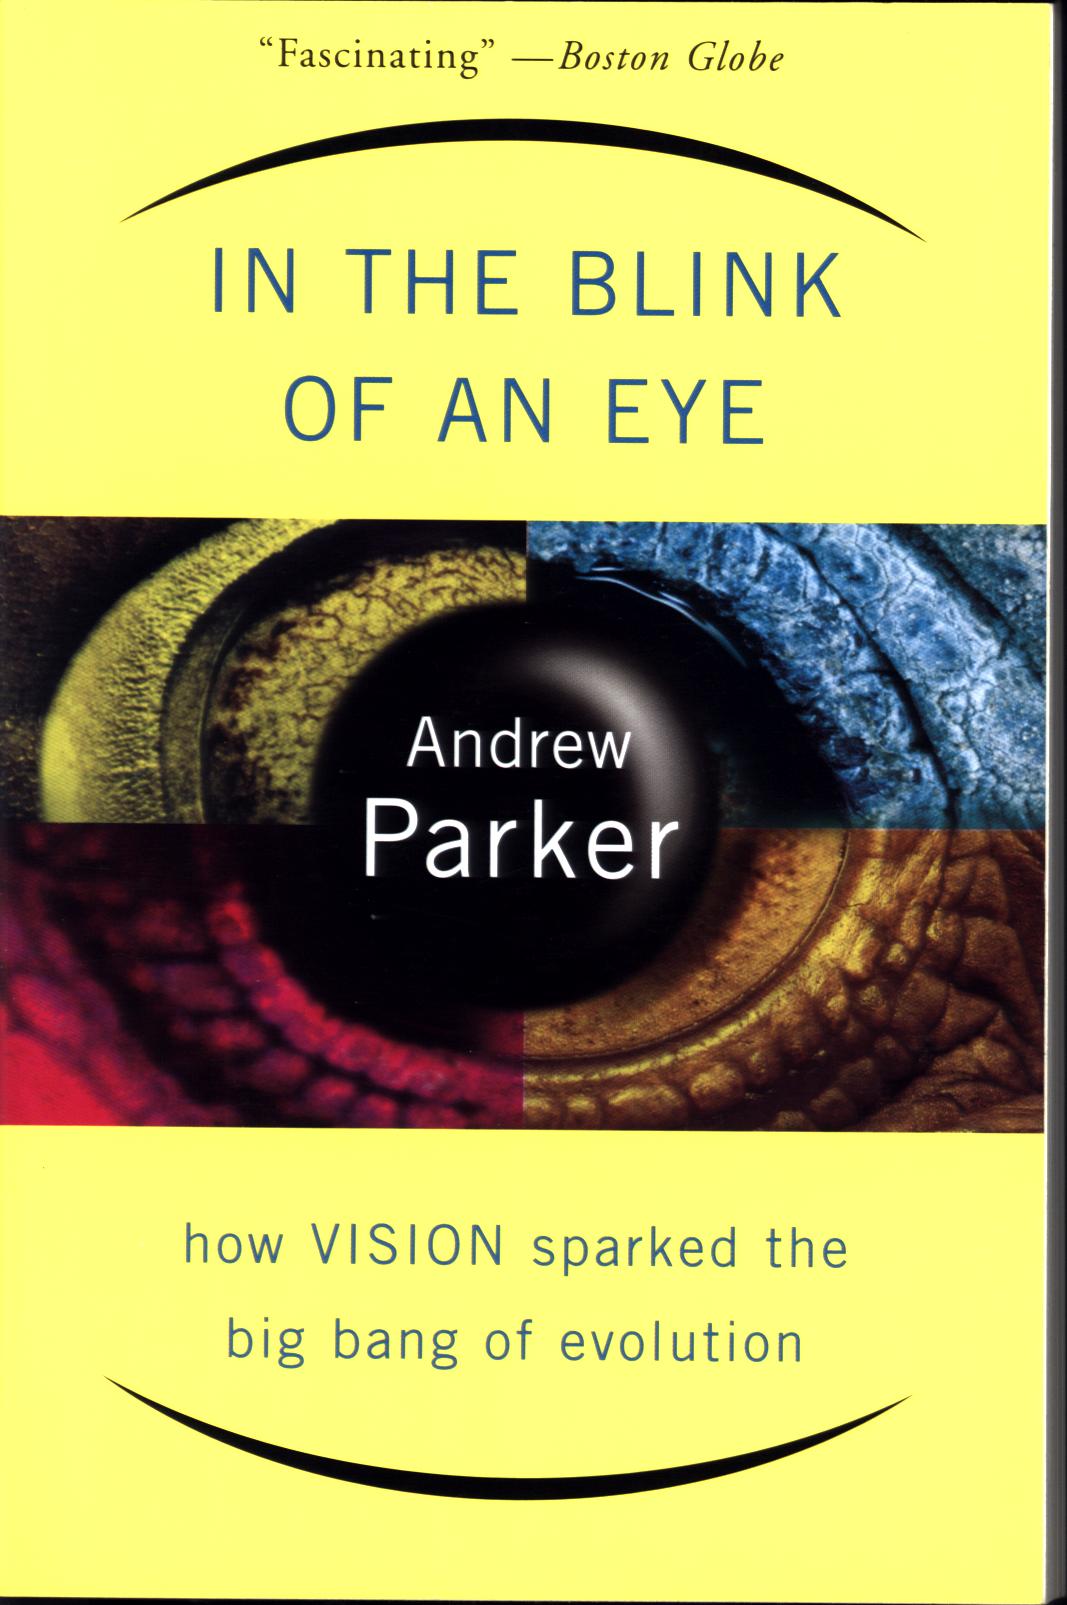 IN THE BLINK OF AN EYE: how vision sparked the big bang of evolution.